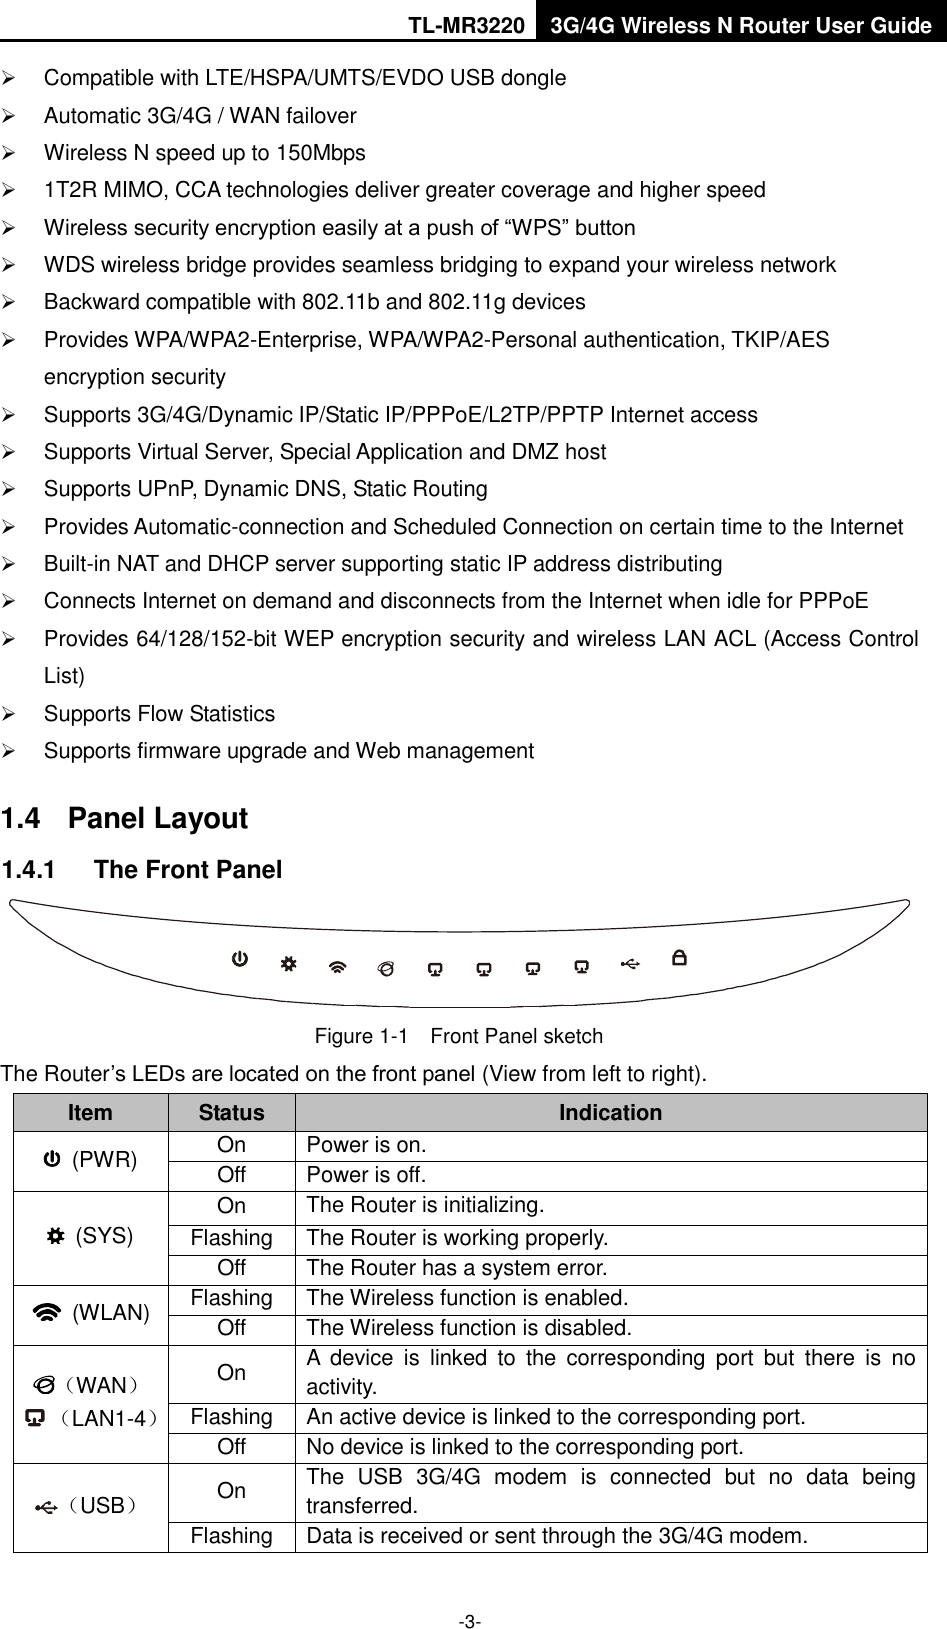 TL-MR3220 3G/4G Wireless N Router User Guide  -3-  Compatible with LTE/HSPA/UMTS/EVDO USB dongle  Automatic 3G/4G / WAN failover  Wireless N speed up to 150Mbps  1T2R MIMO, CCA technologies deliver greater coverage and higher speed  Wireless security encryption easily at a push of “WPS” button  WDS wireless bridge provides seamless bridging to expand your wireless network  Backward compatible with 802.11b and 802.11g devices  Provides WPA/WPA2-Enterprise, WPA/WPA2-Personal authentication, TKIP/AES encryption security  Supports 3G/4G/Dynamic IP/Static IP/PPPoE/L2TP/PPTP Internet access  Supports Virtual Server, Special Application and DMZ host  Supports UPnP, Dynamic DNS, Static Routing  Provides Automatic-connection and Scheduled Connection on certain time to the Internet  Built-in NAT and DHCP server supporting static IP address distributing  Connects Internet on demand and disconnects from the Internet when idle for PPPoE  Provides 64/128/152-bit WEP encryption security and wireless LAN ACL (Access Control List)  Supports Flow Statistics  Supports firmware upgrade and Web management 1.4  Panel Layout 1.4.1  The Front Panel  Figure 1-1  Front Panel sketch The Router’s LEDs are located on the front panel (View from left to right).   Item Status Indication   (PWR) On Power is on. Off Power is off.   (SYS) On The Router is initializing. Flashing The Router is working properly. Off The Router has a system error.   (WLAN) Flashing The Wireless function is enabled. Off The Wireless function is disabled. （WAN）    （LAN1-4） On A  device  is  linked  to  the  corresponding  port  but  there  is  no activity. Flashing An active device is linked to the corresponding port. Off No device is linked to the corresponding port. （USB） On The  USB  3G/4G  modem  is  connected  but  no  data  being transferred. Flashing Data is received or sent through the 3G/4G modem. 